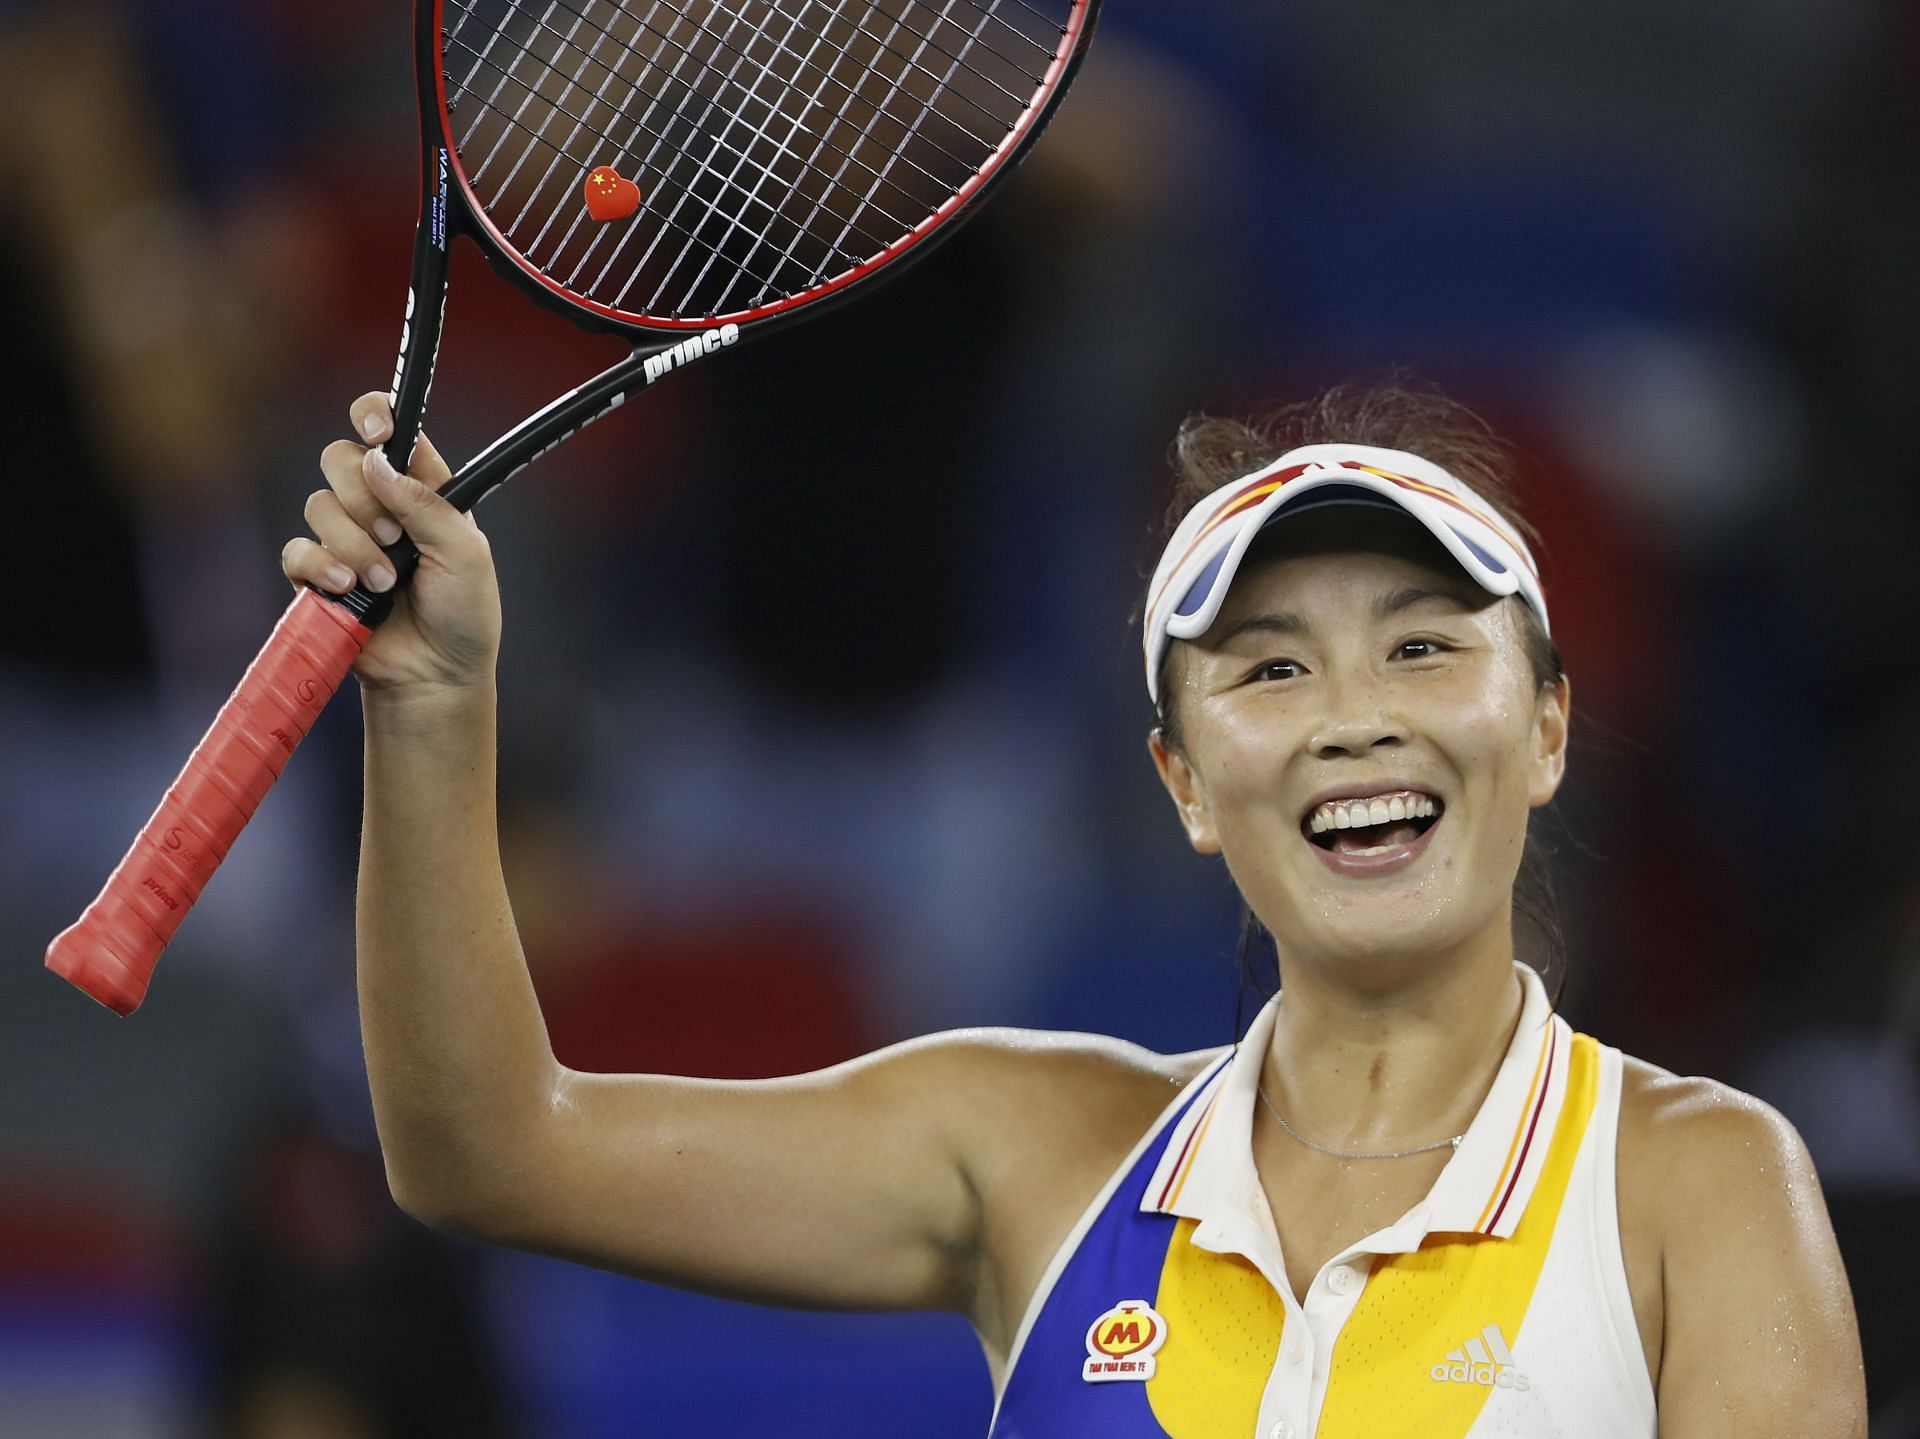 The WTA has announced suspension of all its tournaments in China in support of Peng Shui